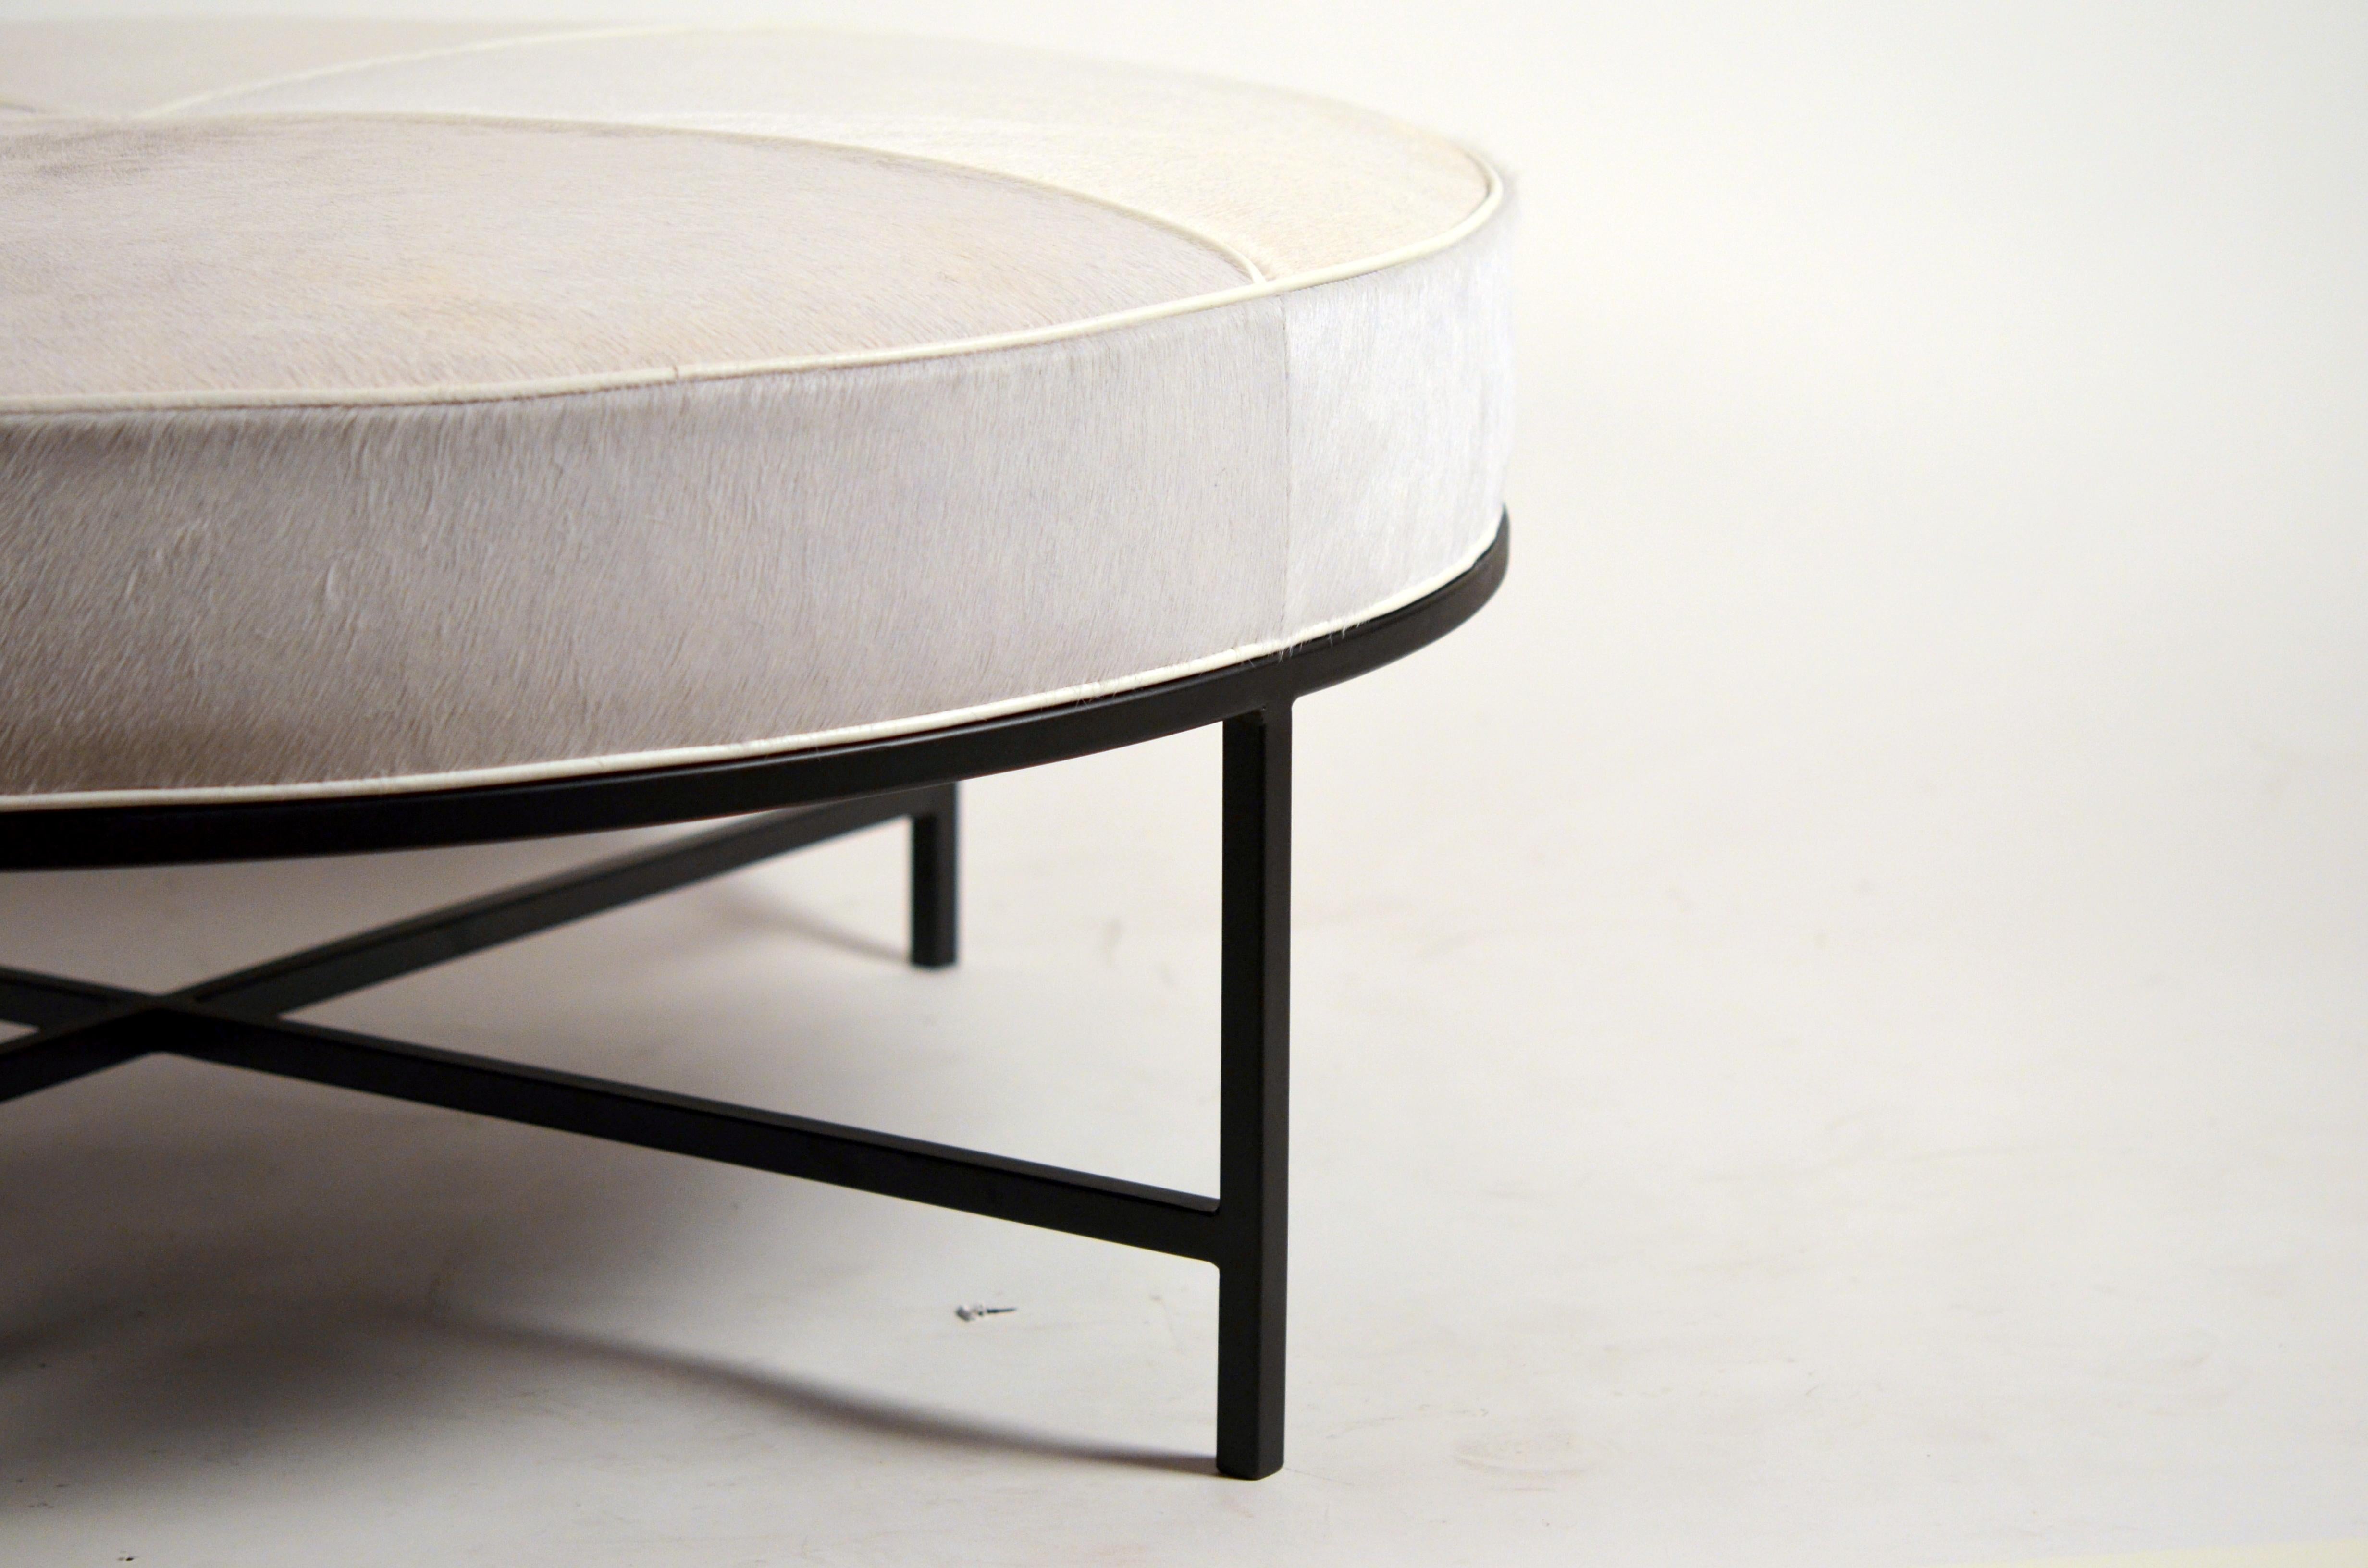 Powder-Coated White Hide and Matte Black 'Tambour' Round Ottoman by Design Frères For Sale